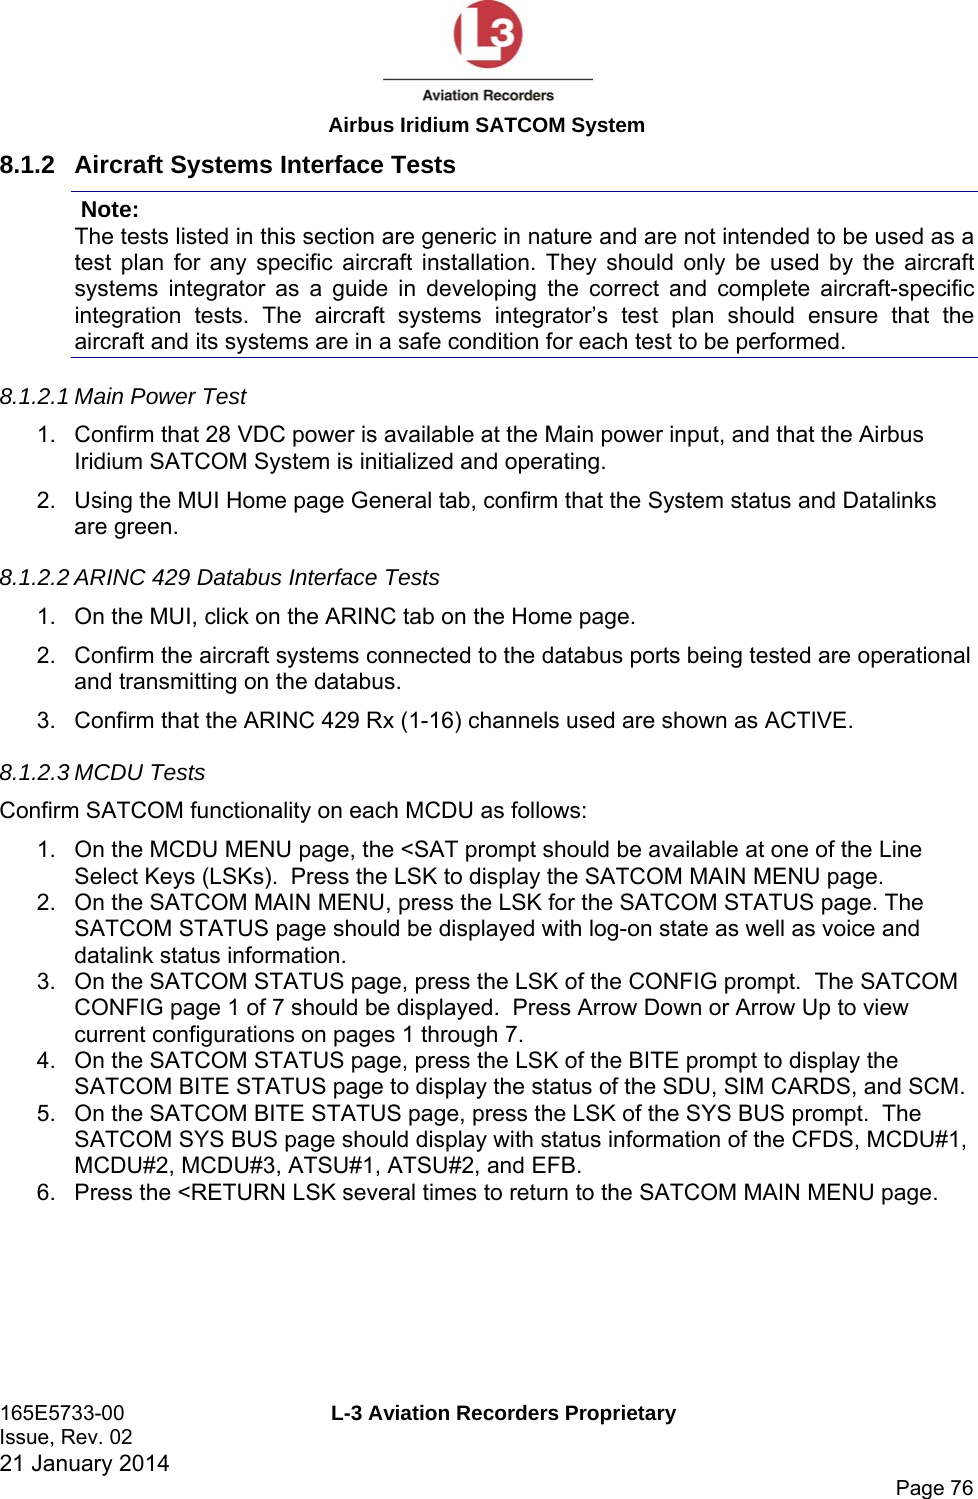  Airbus Iridium SATCOM System 165E5733-00  L-3 Aviation Recorders Proprietary Issue, Rev. 02   21 January 2014      Page 76 8.1.2  Aircraft Systems Interface Tests  Note: The tests listed in this section are generic in nature and are not intended to be used as a test plan for any specific aircraft installation. They should only be used by the aircraft systems integrator as a guide in developing the correct and complete aircraft-specific integration tests. The aircraft systems integrator’s test plan should ensure that the aircraft and its systems are in a safe condition for each test to be performed. 8.1.2.1 Main Power Test 1.  Confirm that 28 VDC power is available at the Main power input, and that the Airbus Iridium SATCOM System is initialized and operating. 2.  Using the MUI Home page General tab, confirm that the System status and Datalinks are green. 8.1.2.2 ARINC 429 Databus Interface Tests 1.  On the MUI, click on the ARINC tab on the Home page. 2.  Confirm the aircraft systems connected to the databus ports being tested are operational and transmitting on the databus. 3.  Confirm that the ARINC 429 Rx (1-16) channels used are shown as ACTIVE. 8.1.2.3 MCDU Tests Confirm SATCOM functionality on each MCDU as follows: 1.  On the MCDU MENU page, the &lt;SAT prompt should be available at one of the Line Select Keys (LSKs).  Press the LSK to display the SATCOM MAIN MENU page. 2.  On the SATCOM MAIN MENU, press the LSK for the SATCOM STATUS page. The SATCOM STATUS page should be displayed with log-on state as well as voice and datalink status information. 3.  On the SATCOM STATUS page, press the LSK of the CONFIG prompt.  The SATCOM CONFIG page 1 of 7 should be displayed.  Press Arrow Down or Arrow Up to view current configurations on pages 1 through 7. 4.  On the SATCOM STATUS page, press the LSK of the BITE prompt to display the SATCOM BITE STATUS page to display the status of the SDU, SIM CARDS, and SCM. 5.  On the SATCOM BITE STATUS page, press the LSK of the SYS BUS prompt.  The SATCOM SYS BUS page should display with status information of the CFDS, MCDU#1, MCDU#2, MCDU#3, ATSU#1, ATSU#2, and EFB. 6.  Press the &lt;RETURN LSK several times to return to the SATCOM MAIN MENU page.    